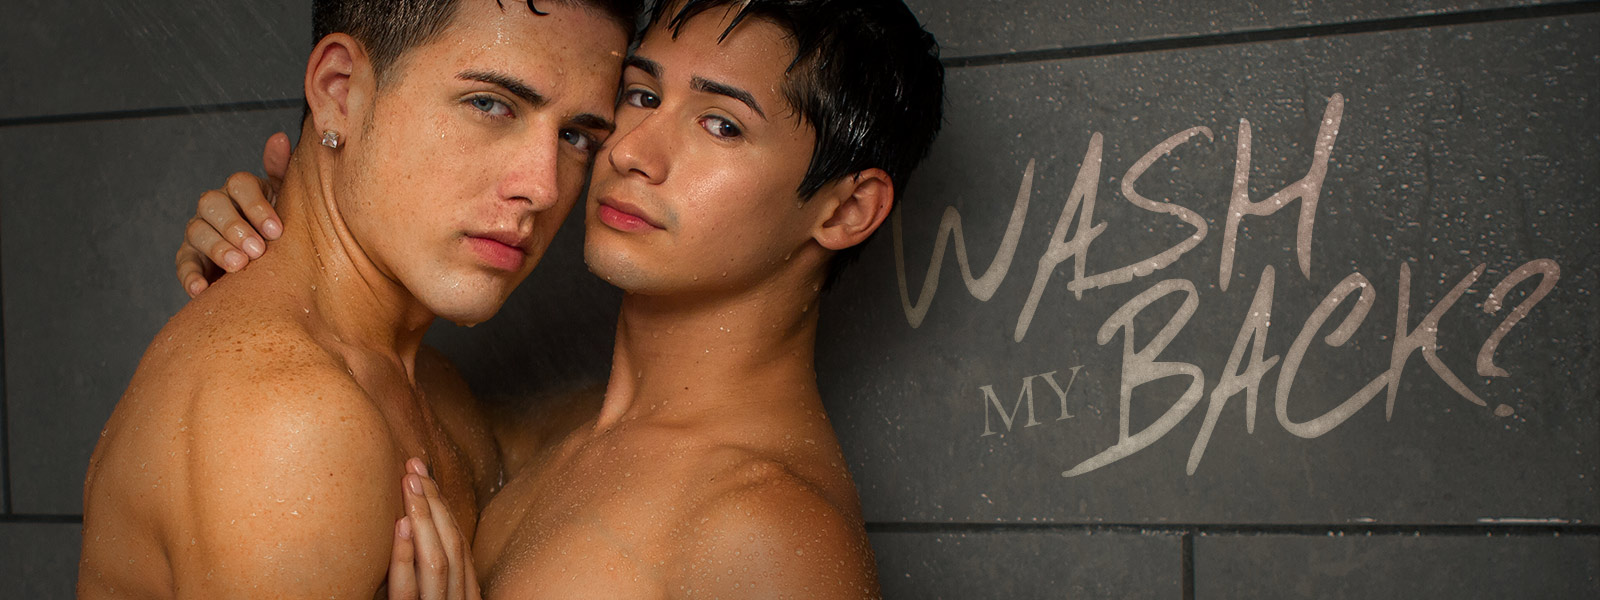 Smooth young twinks Liam Riley & Dustin Gold enjoy sex in the shower